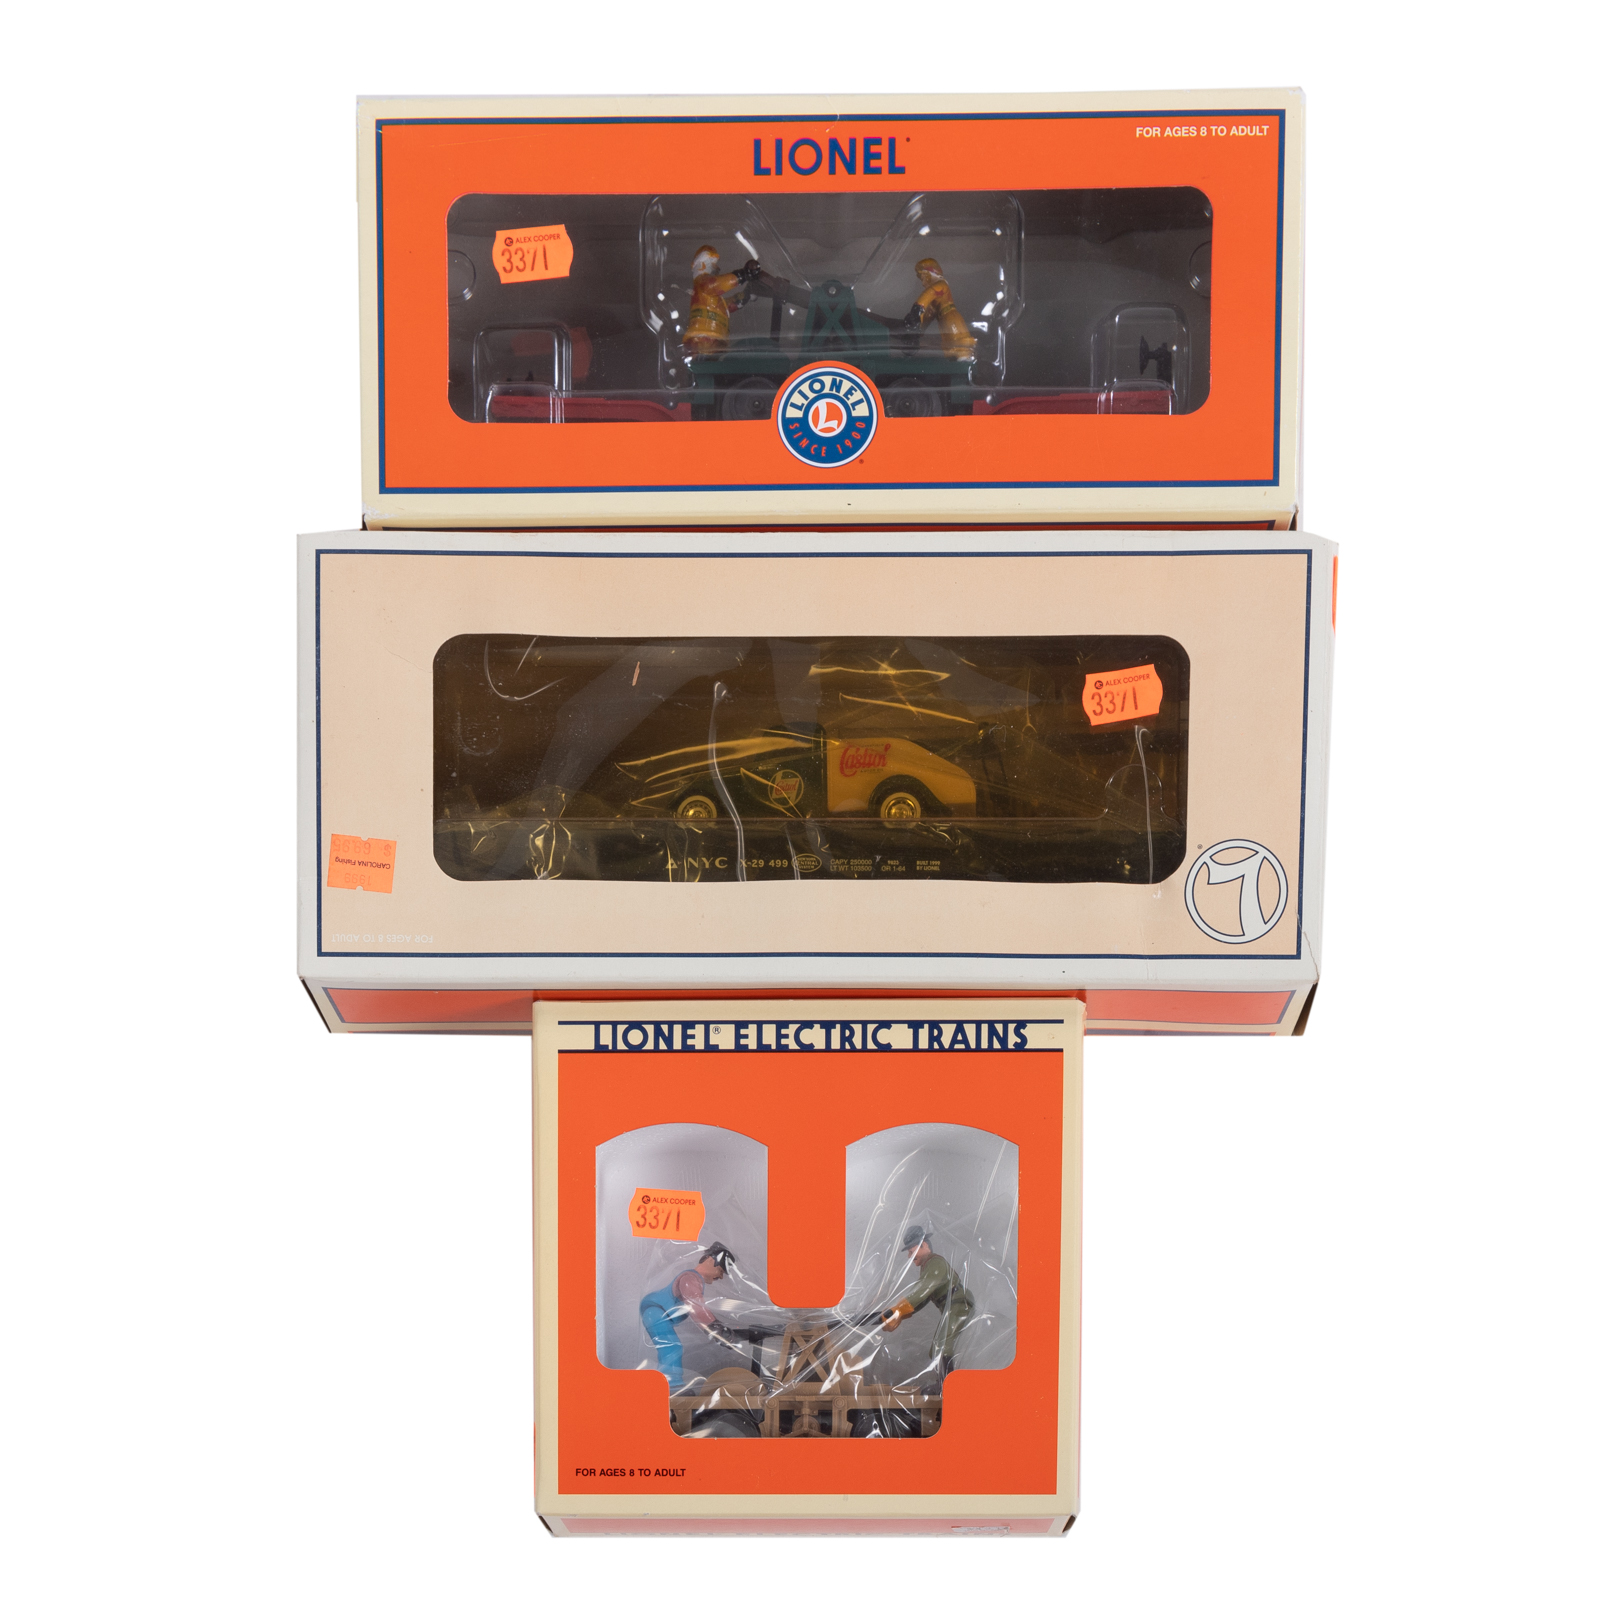 TWO LIONEL HANDCARS ONE FLATCAR 36a141